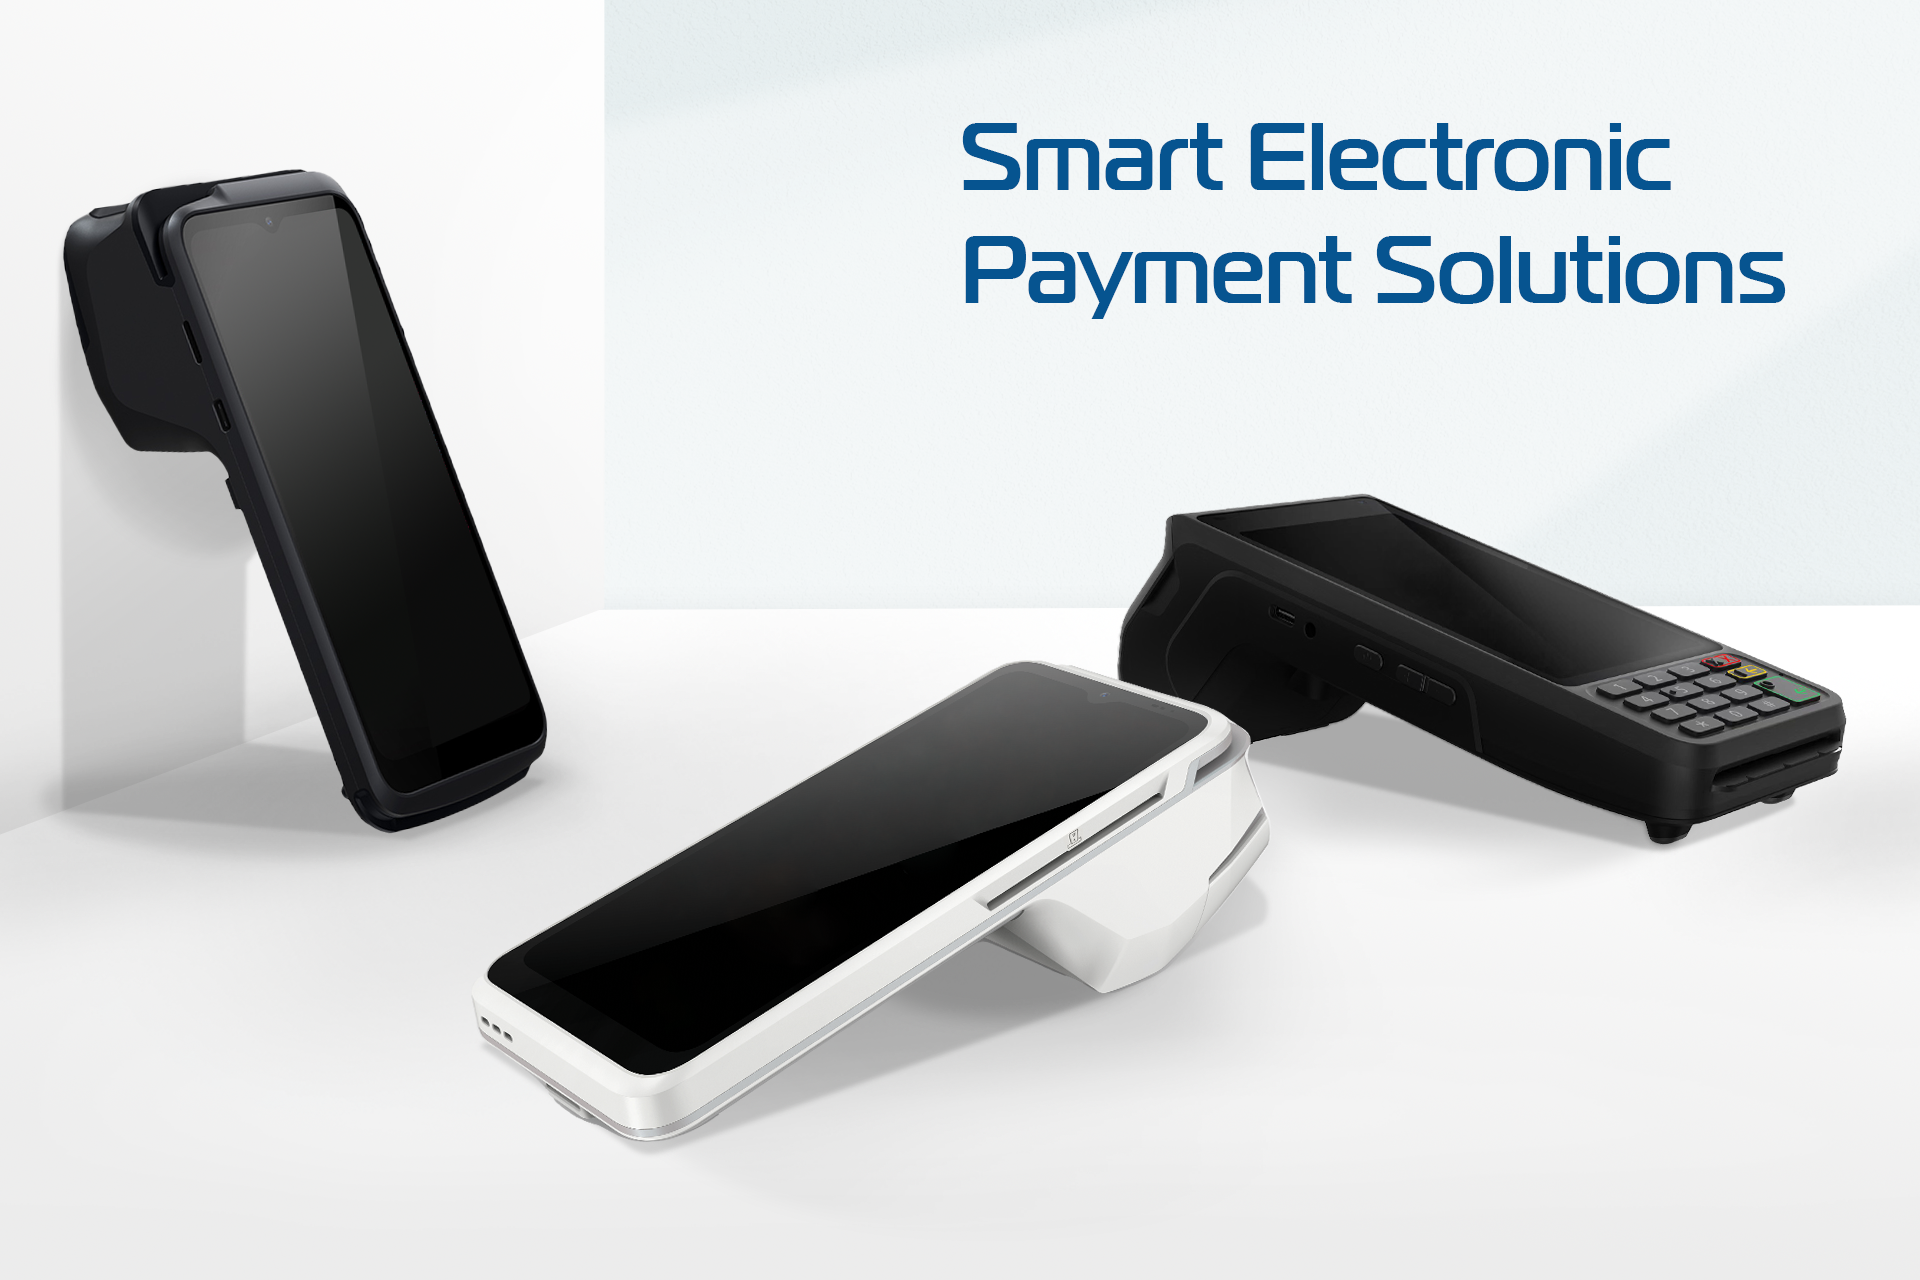 Smart Electronic Payment Solutions